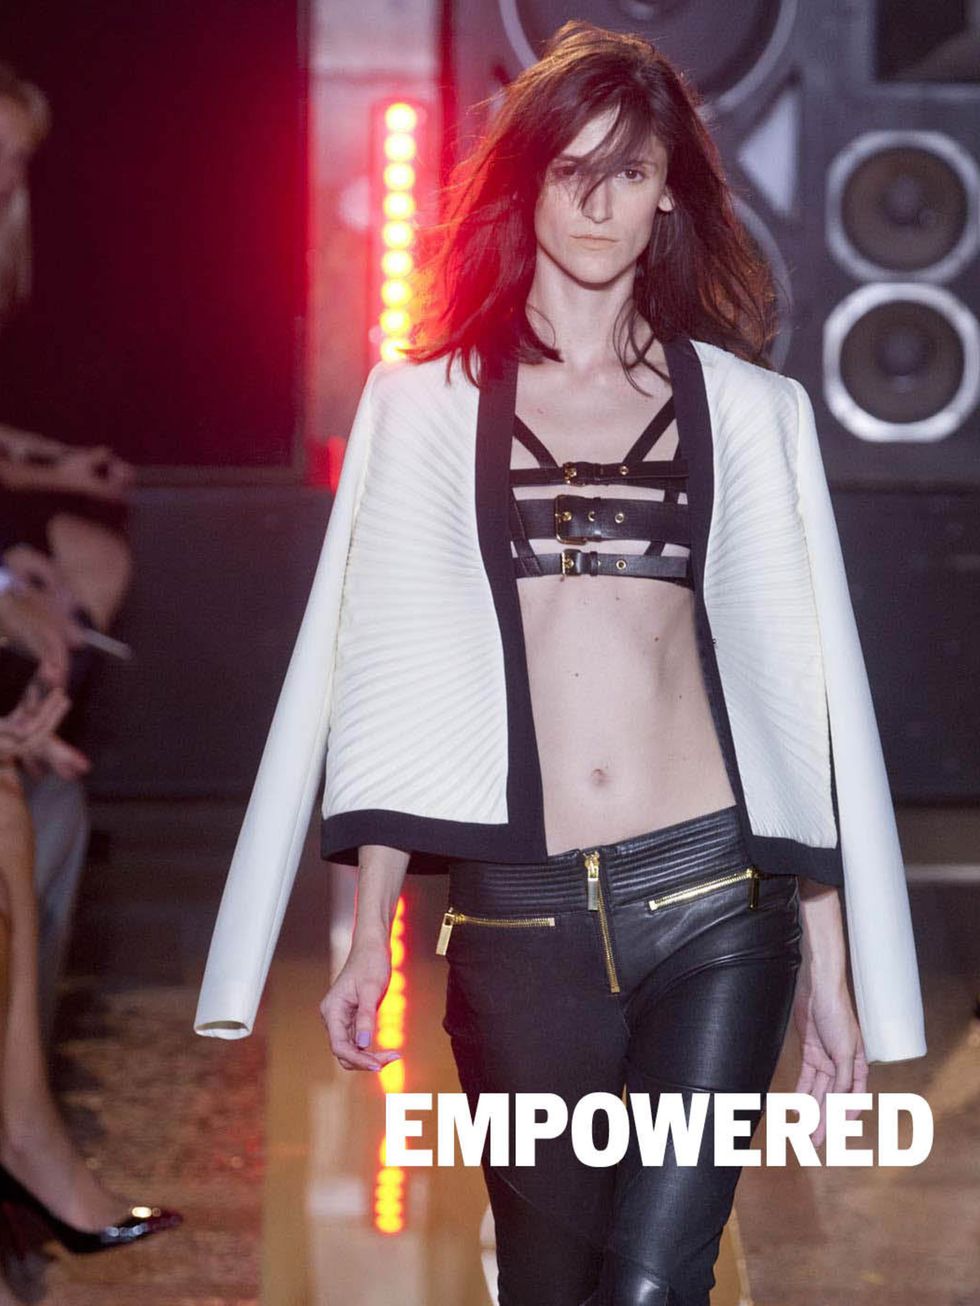 <p>EMPOWERED: Ready to take a brave new shift in gear? When all the big designers gang up with one thing in mind  empowering women  its time to take note. Miuccia Prada, Phoebe Philo et al were on a mission to inspire us into clothes that make bold sta